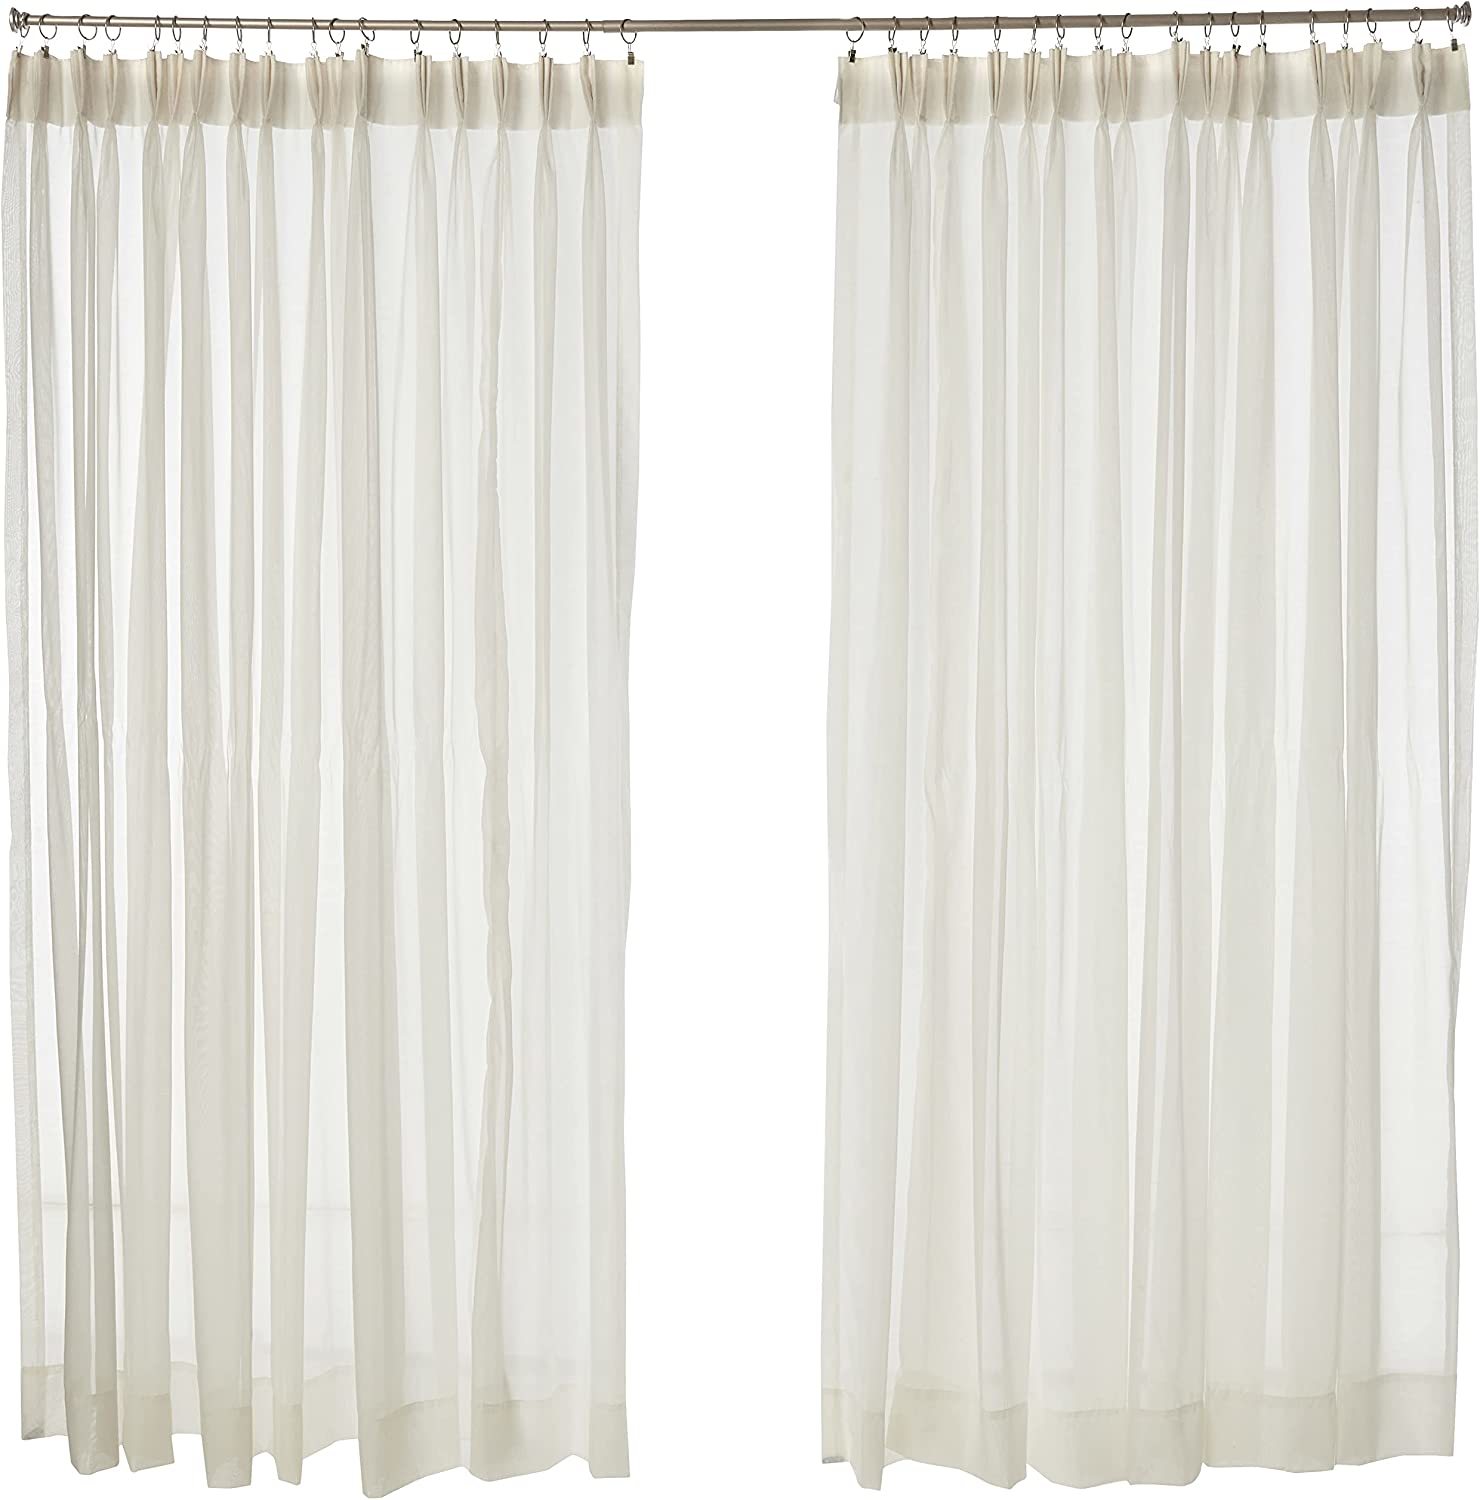 Stylemaster Splendor Pinch Pleated Drapes Pair, 2 Of 60" By 84", Beige. - $73.94